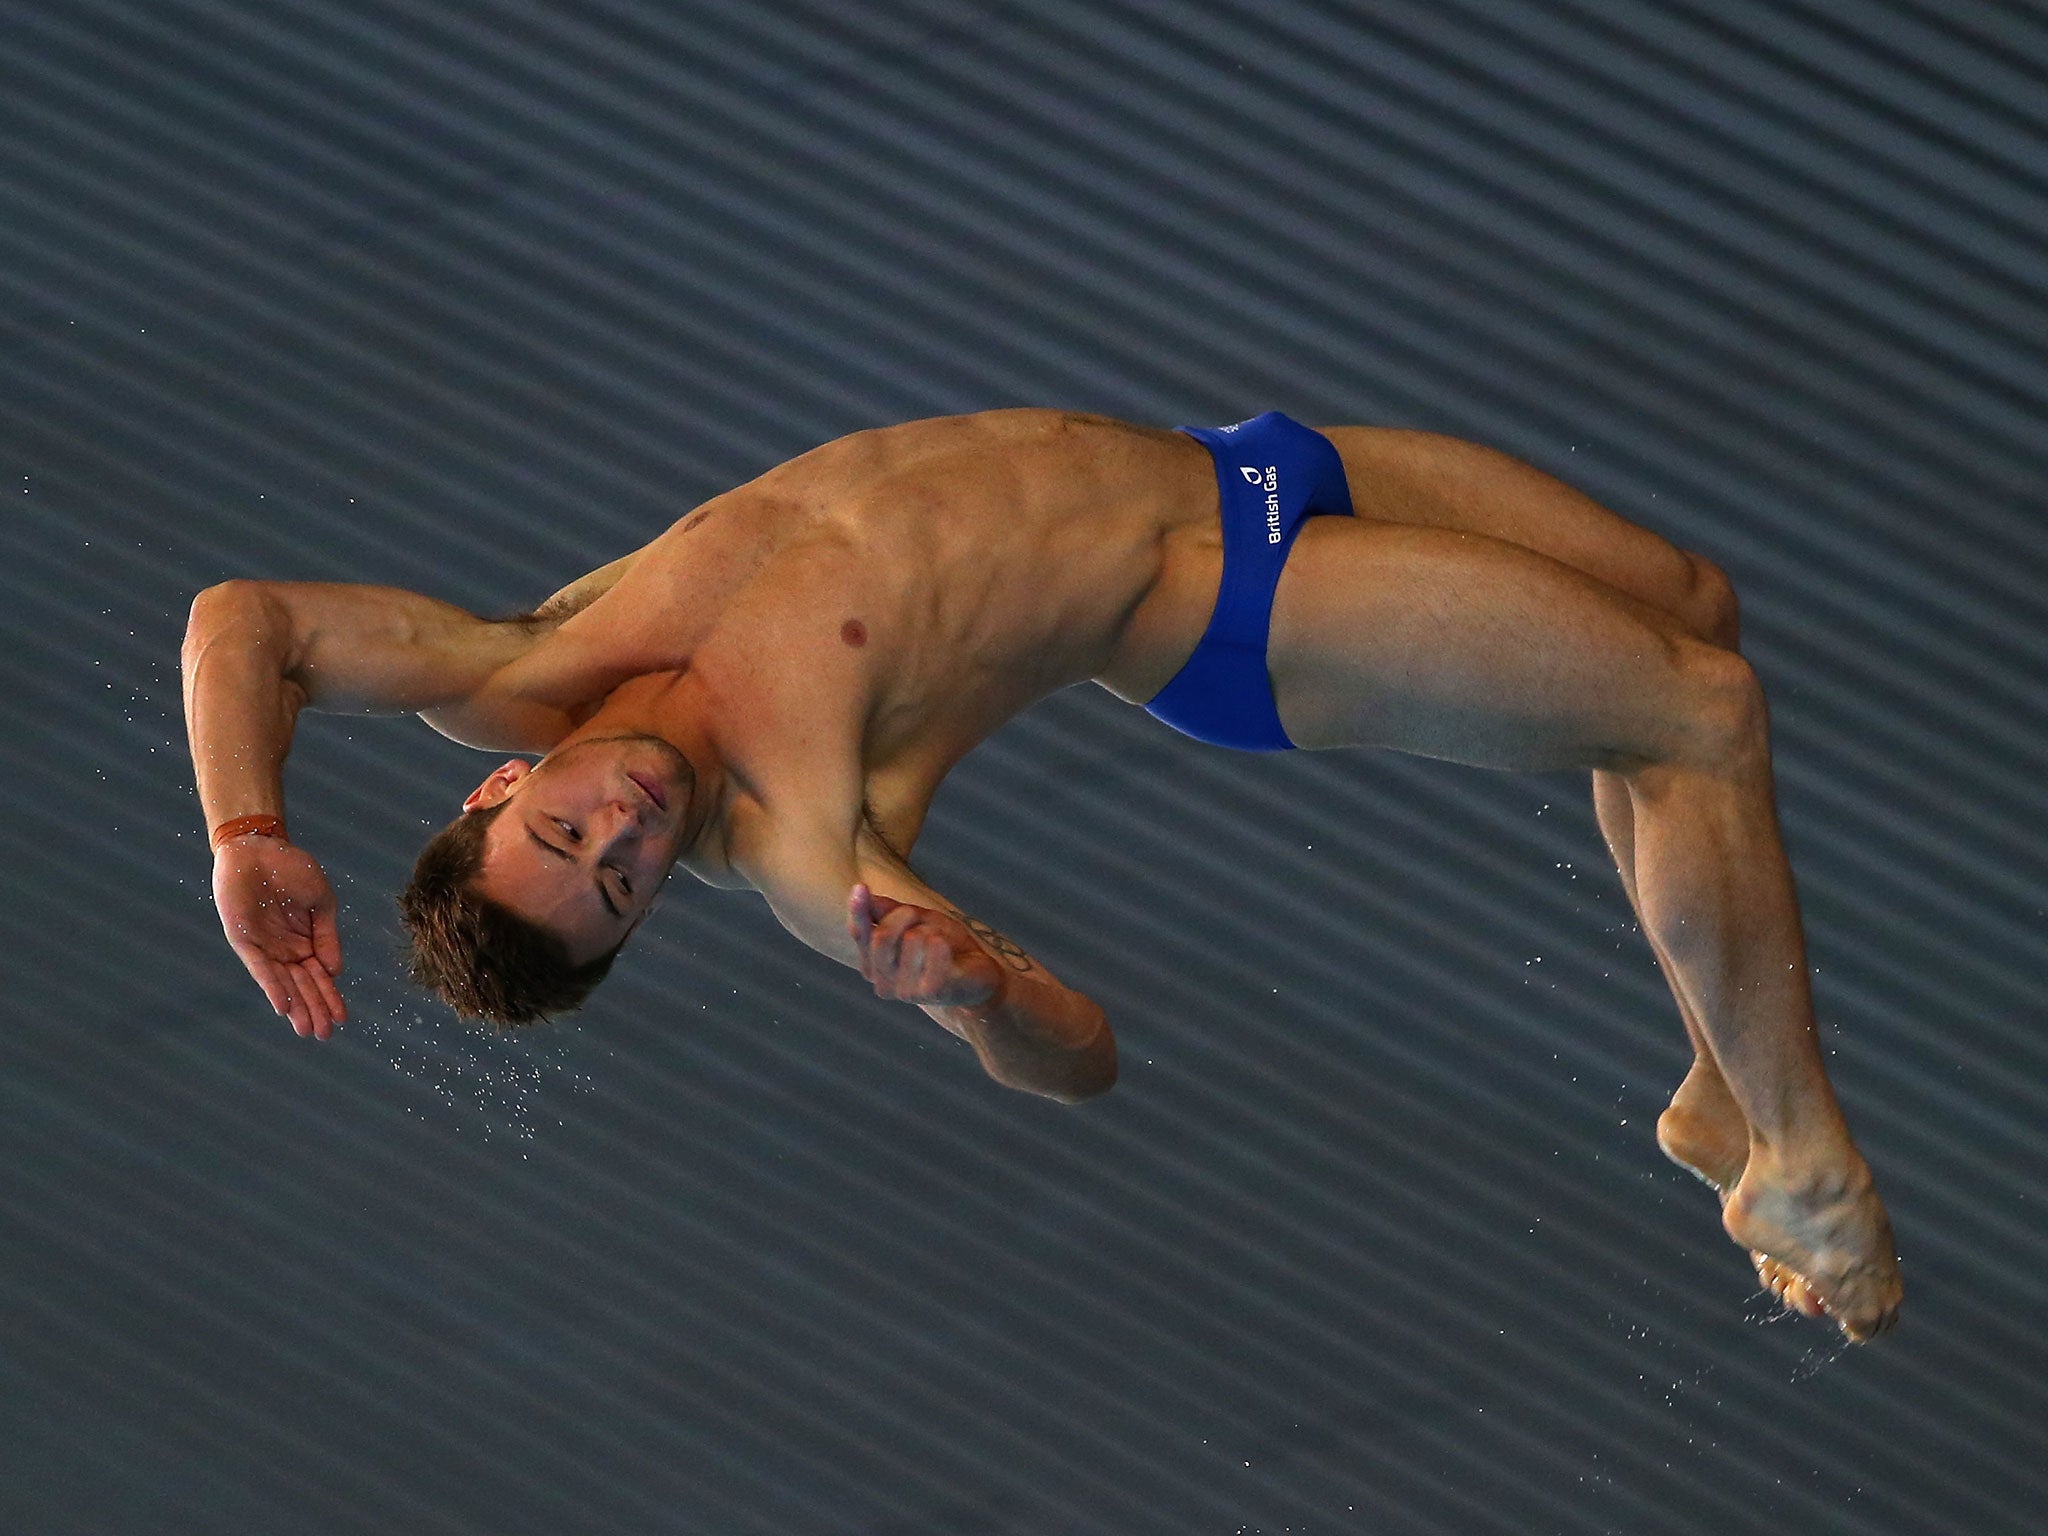 Tom Daley secured silver in the Diving World Series event in Mexico